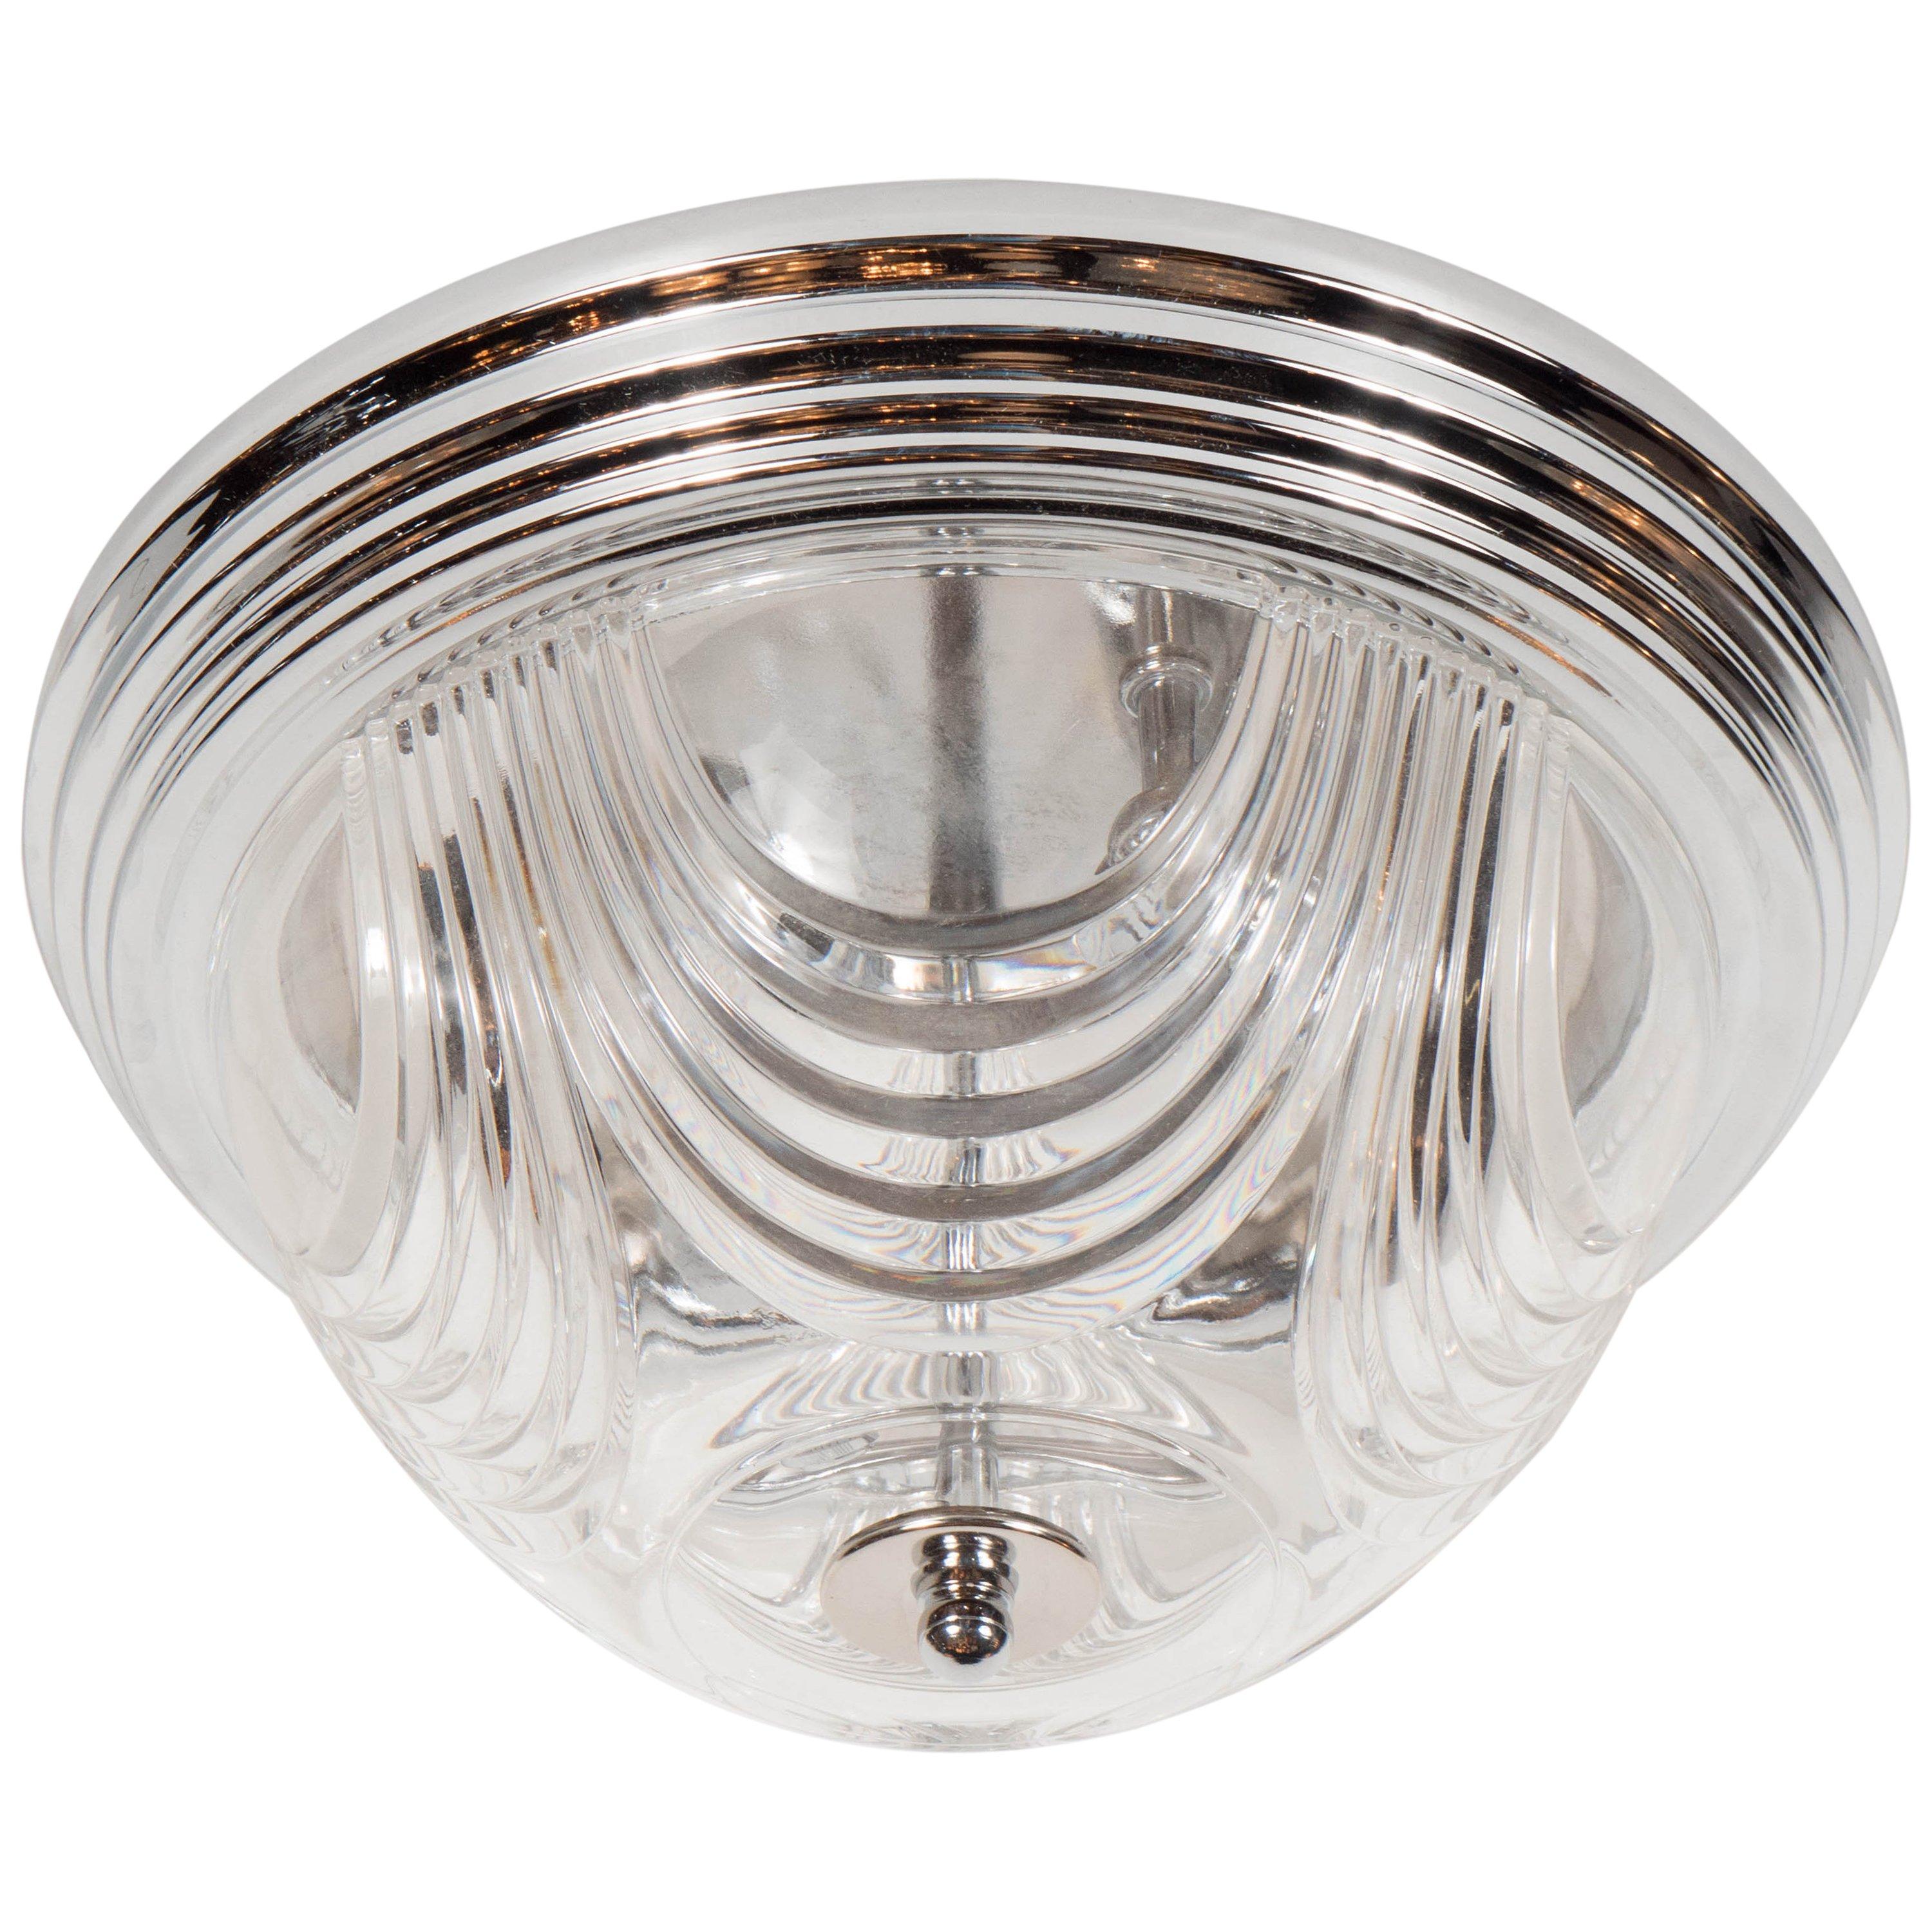 Art Deco Style Flush Mount Chandelier with Chrome Fittings